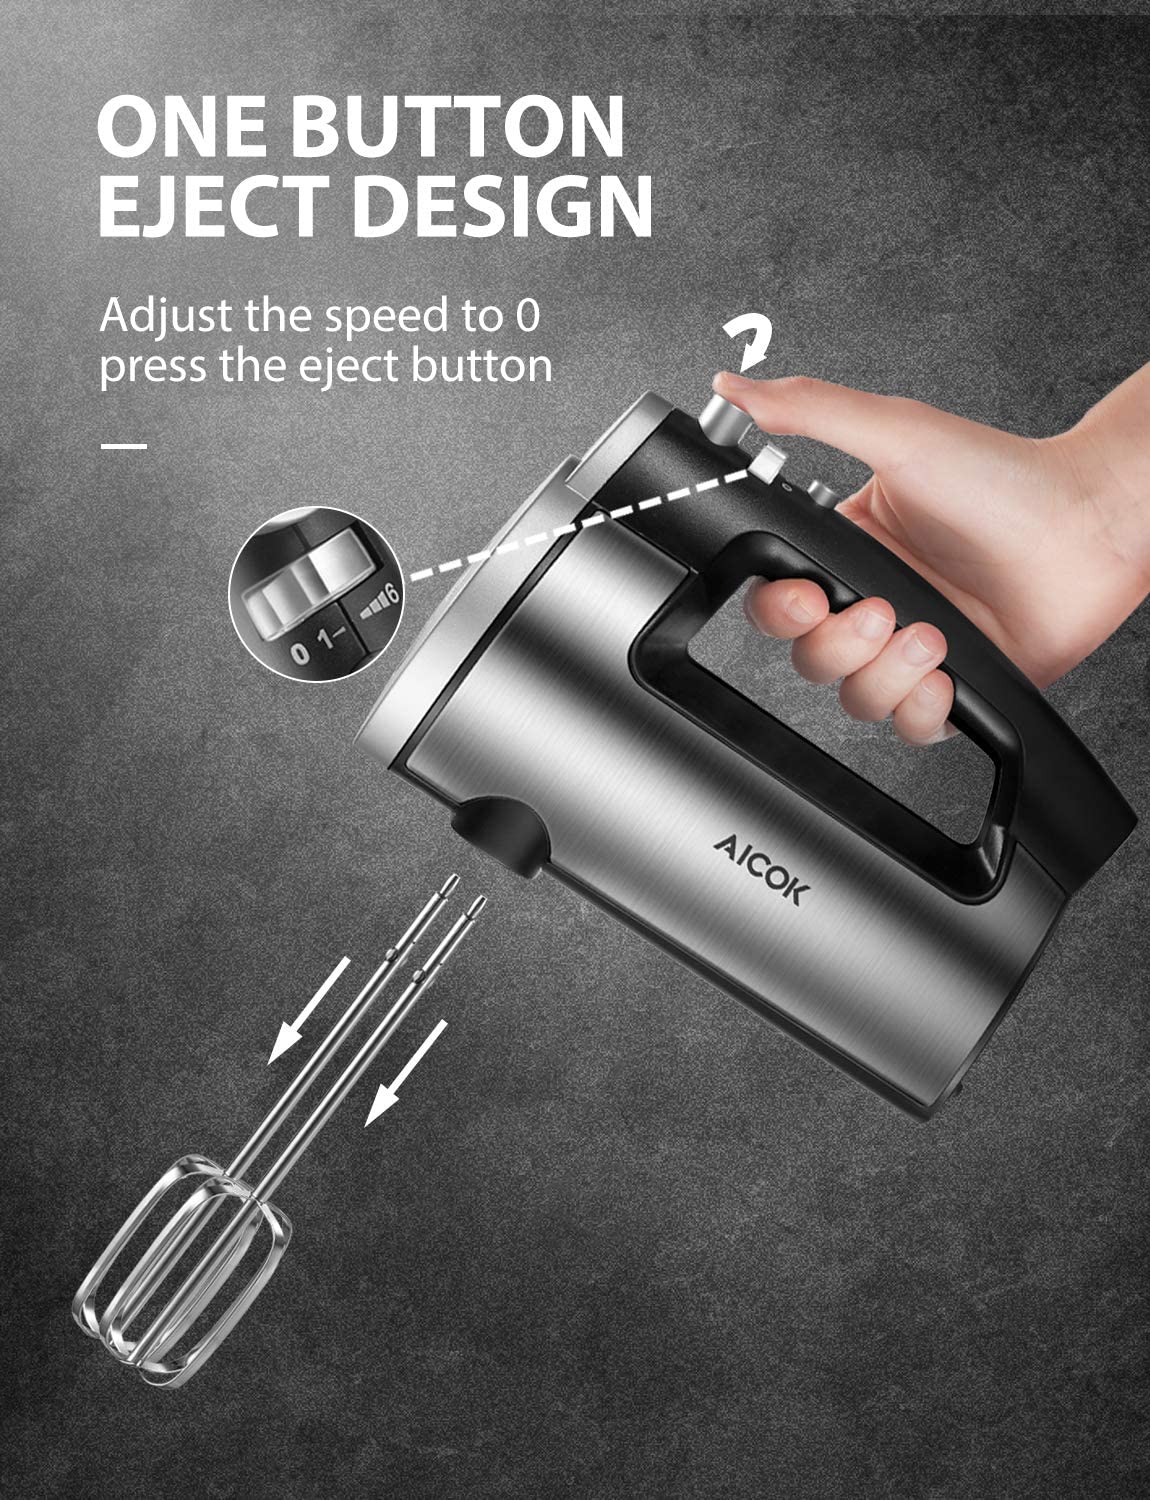 AICOK-Hand Mixer Electric 6-Speed Kitchen Handheld Mixer HM833. easy assemble and clean hand mixer, compact light hand mixer